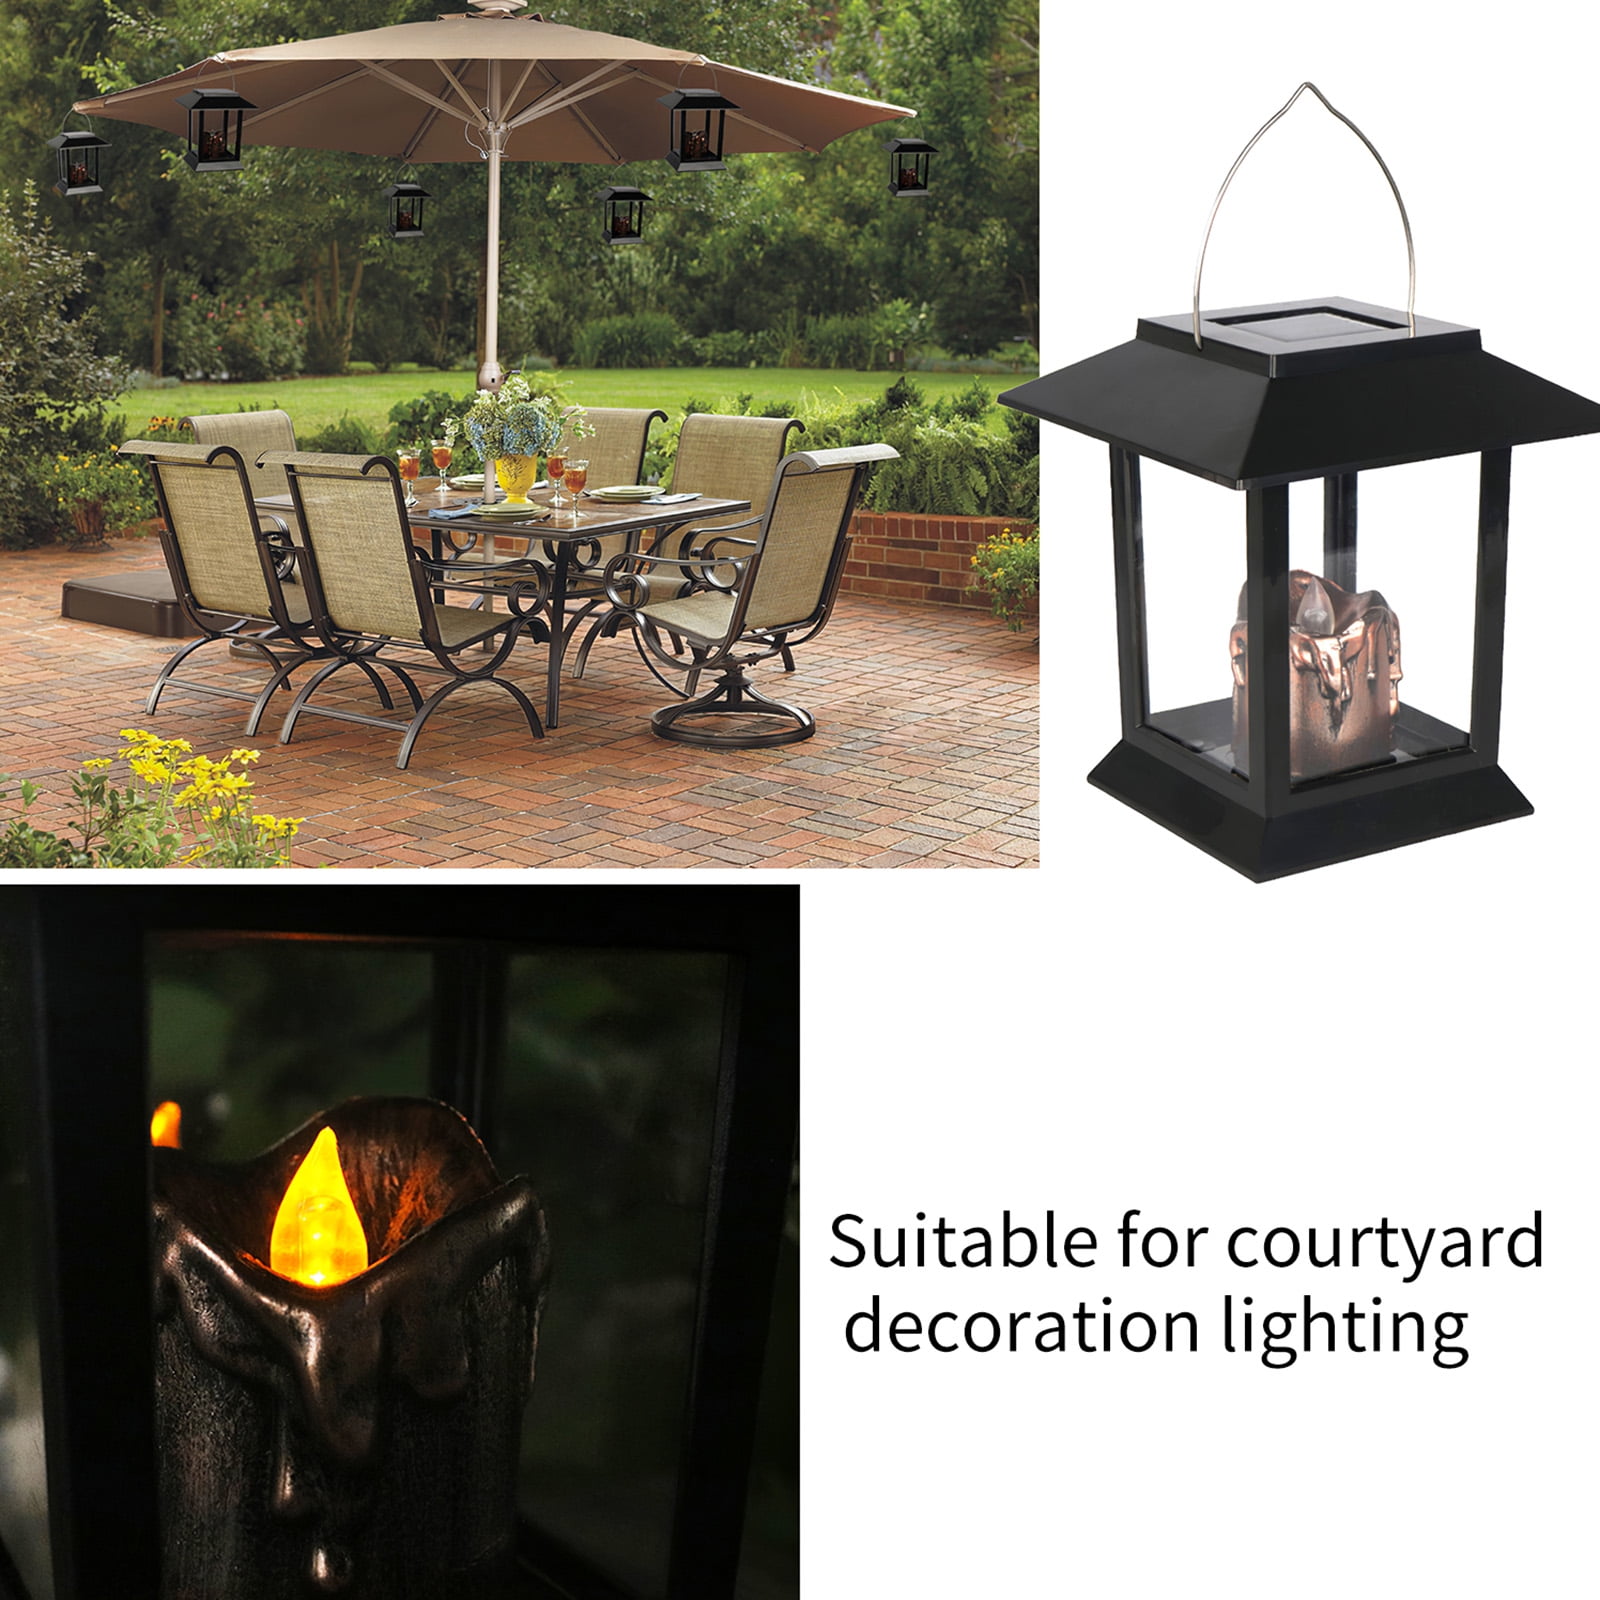 Warm Light FomaTrade LED Solar Mission Lantern Pack of 6 Vintage Waterproof Umbrella Lantern Led Candle Lights with Clamp for Beach Umbrella Tree Pavilion Garden Yard Lawn Outdoor Candle 2 